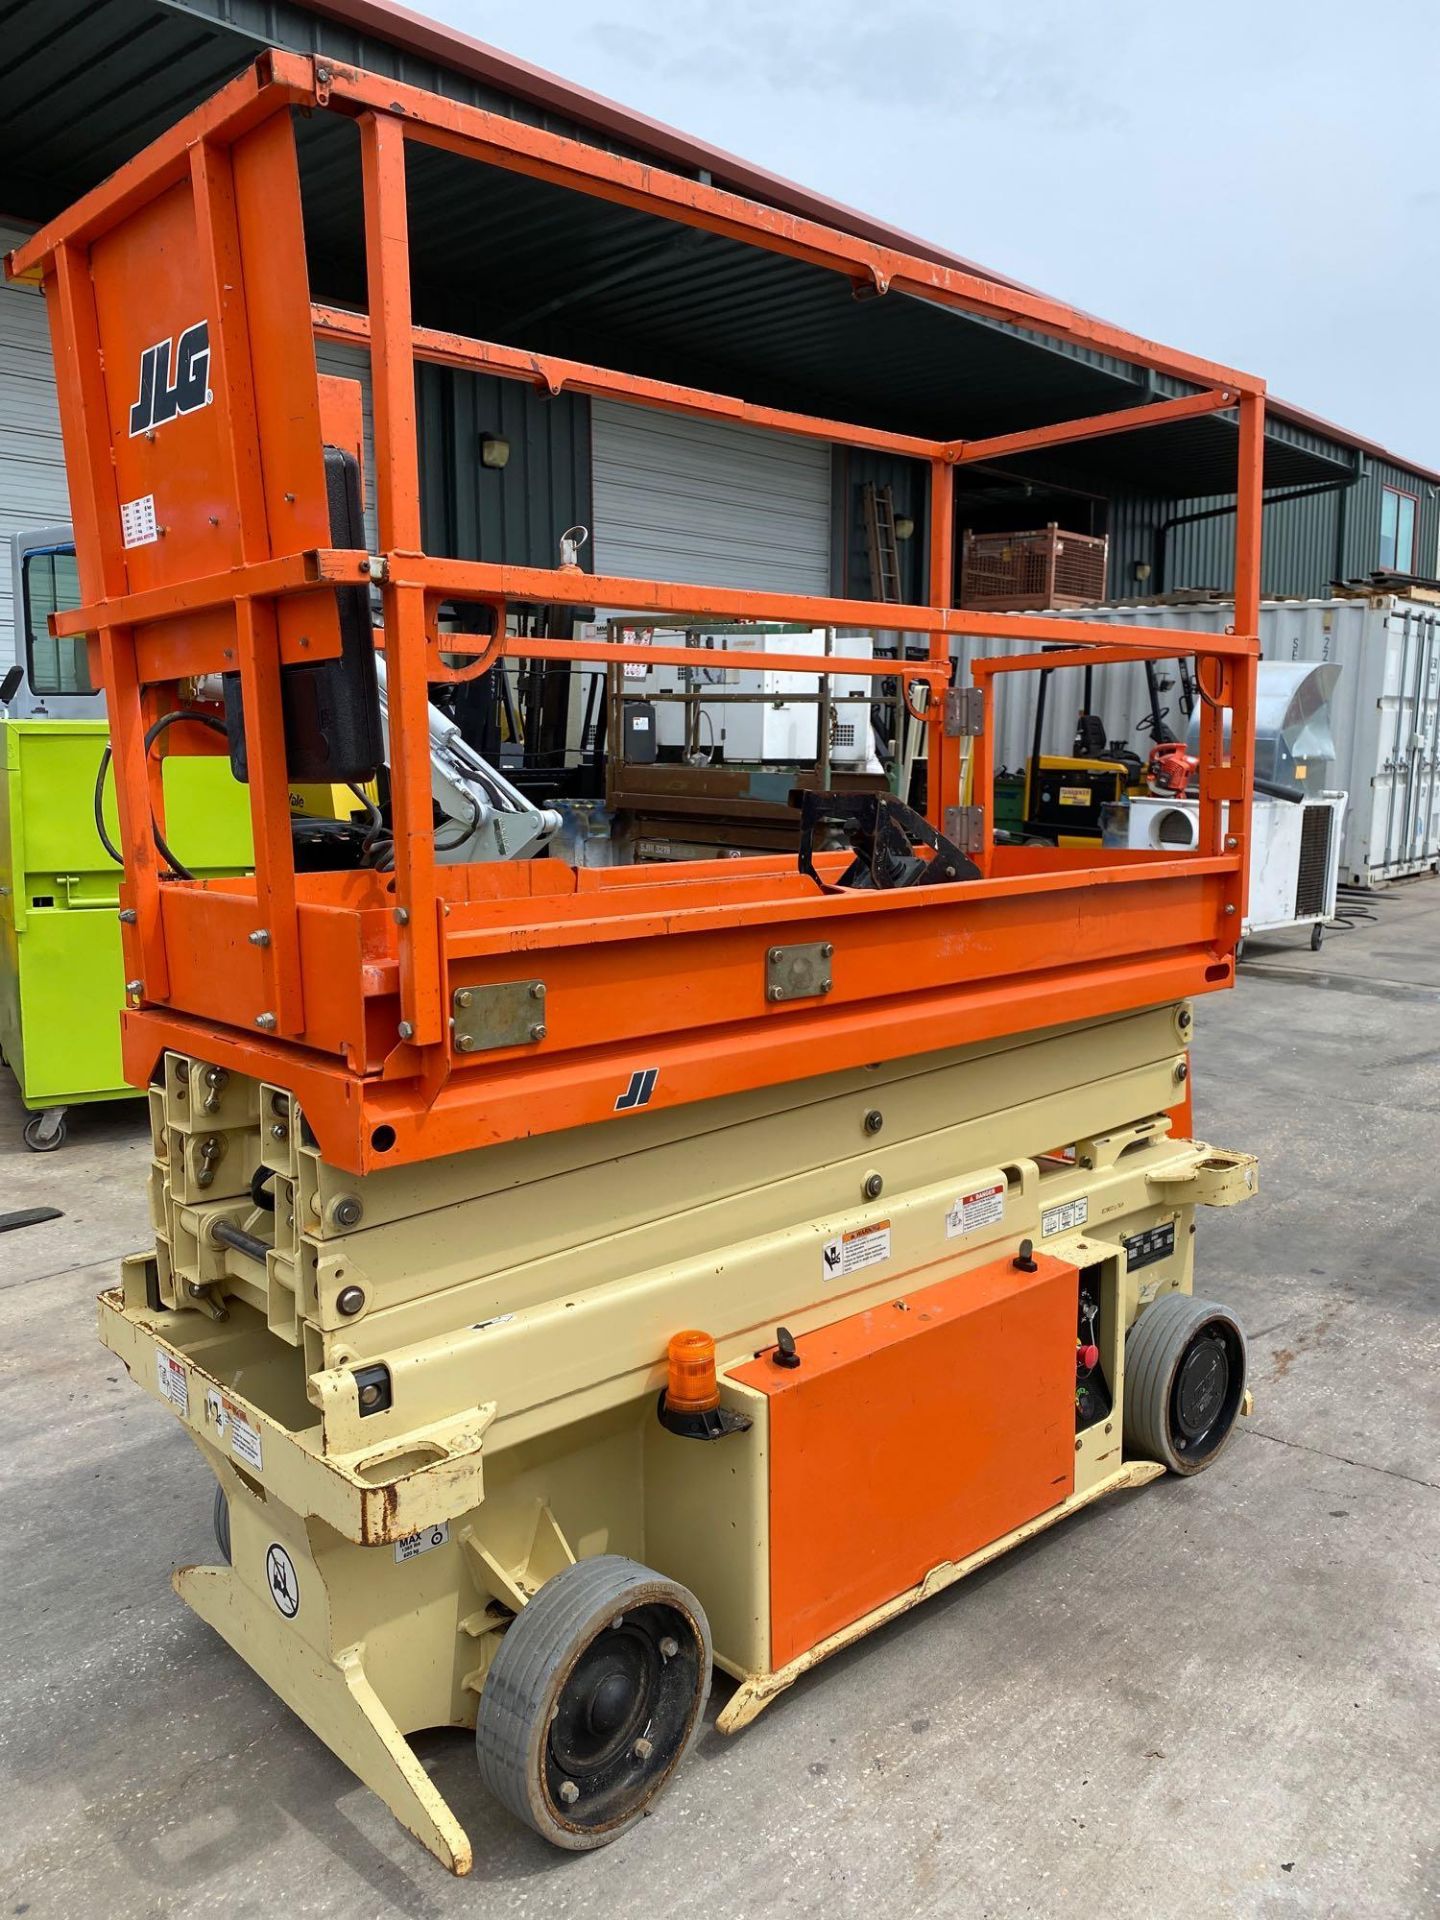 2015 JLG 1932RS ELECTRIC SCISSOR LIFT, SELF PROPELLED, 19' PLATFORM HEIGHTT, BUILT IN BATTERY CHARGE - Image 3 of 7